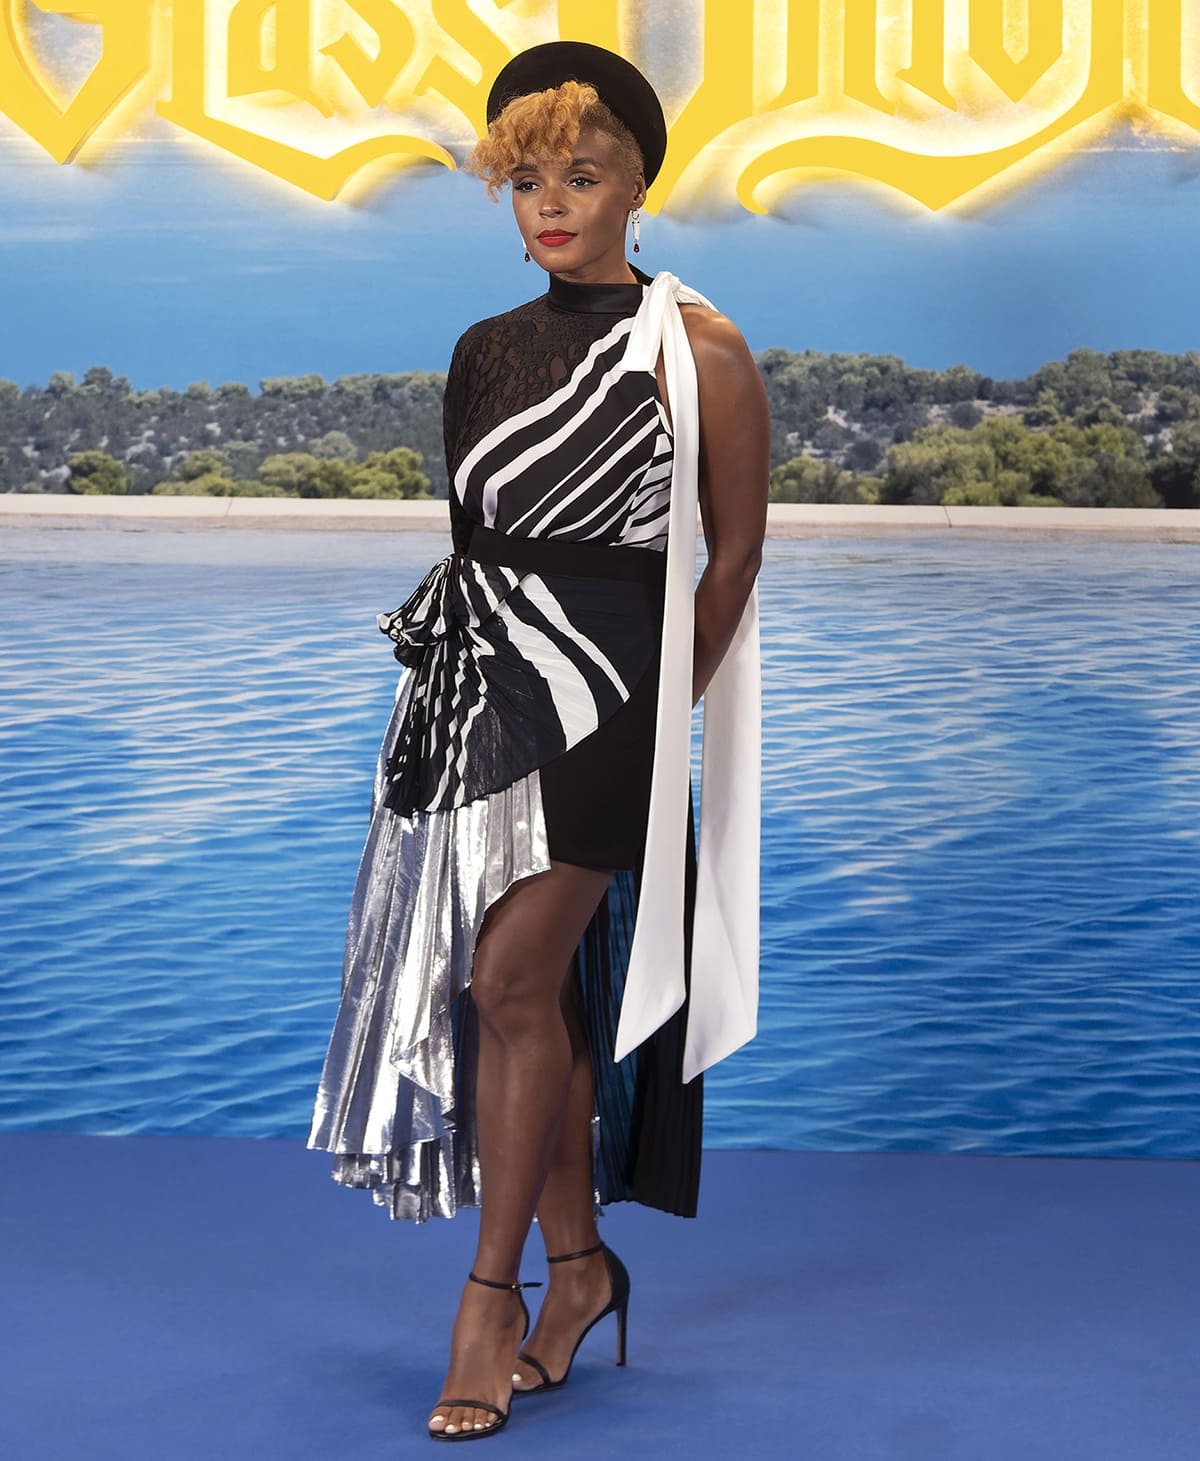 Janelle Monae attends the Glass Onion photocall in a multilayered black and white Alfredo Martinez dress